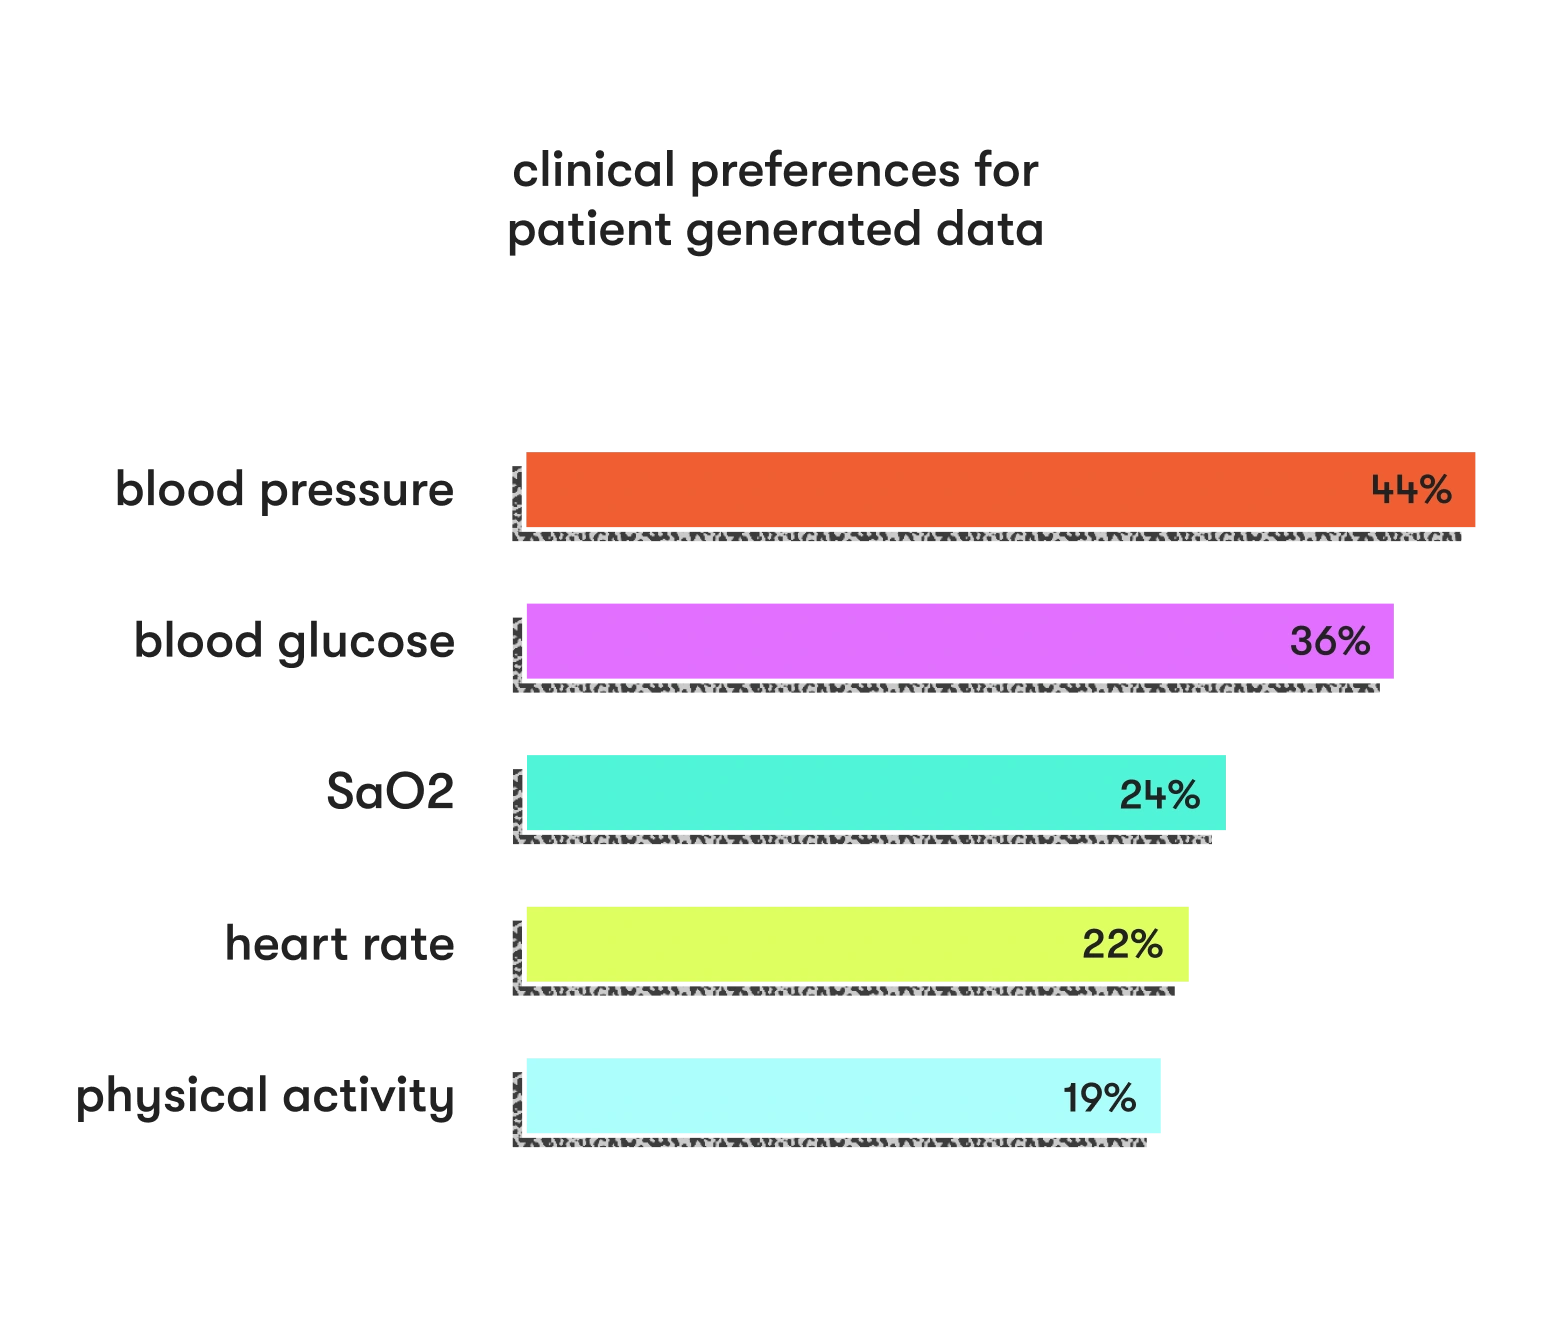 Clinician preferences for patient-generated data